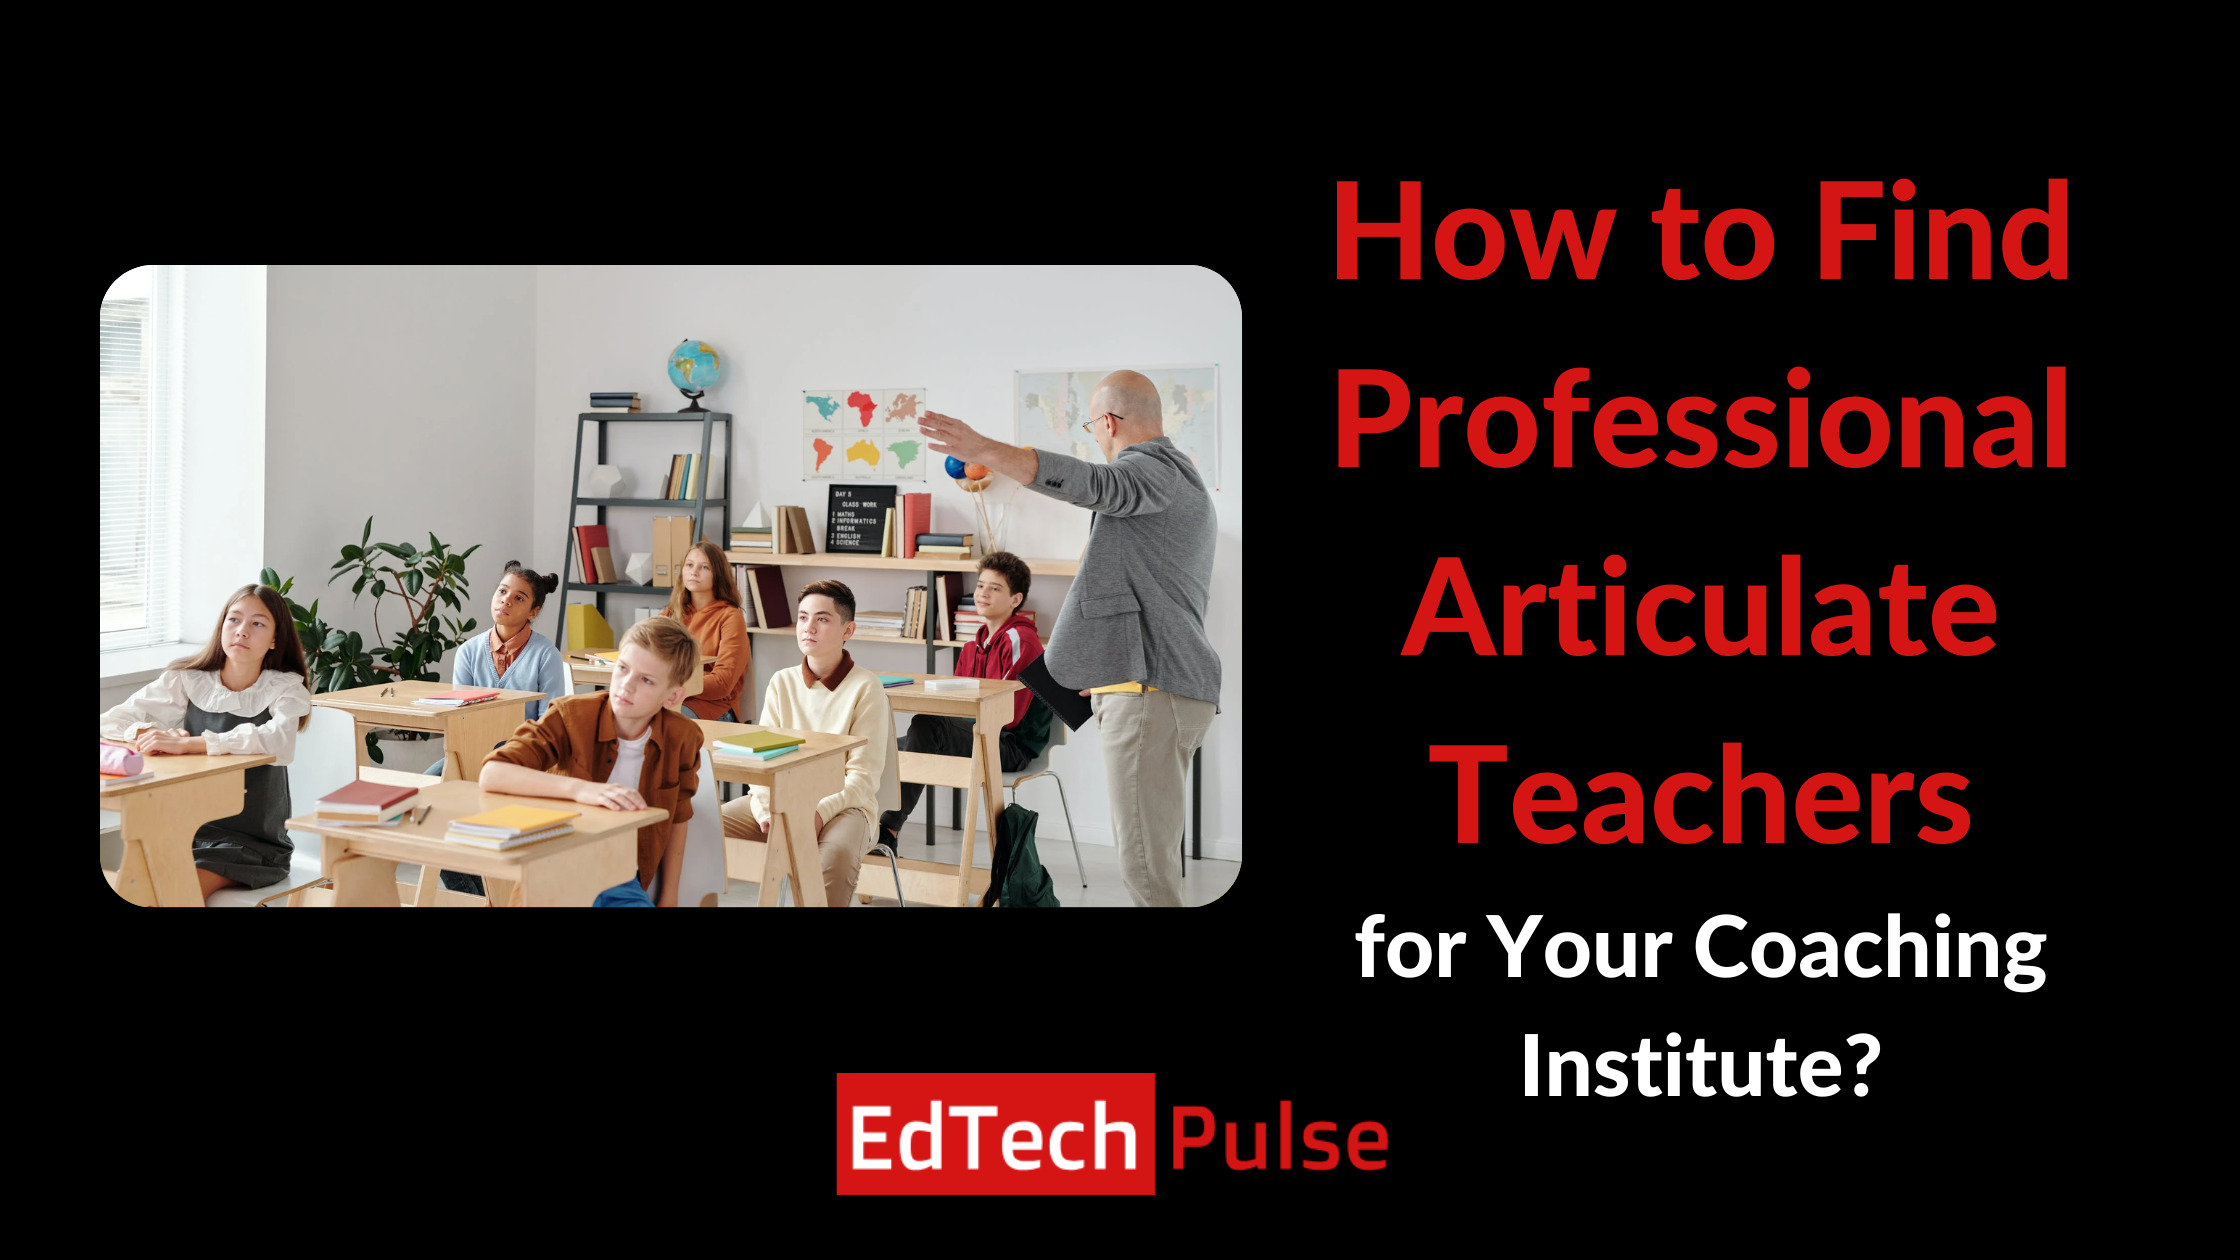 How to Find Professional Articulate Teachers for Your Coaching Institute?